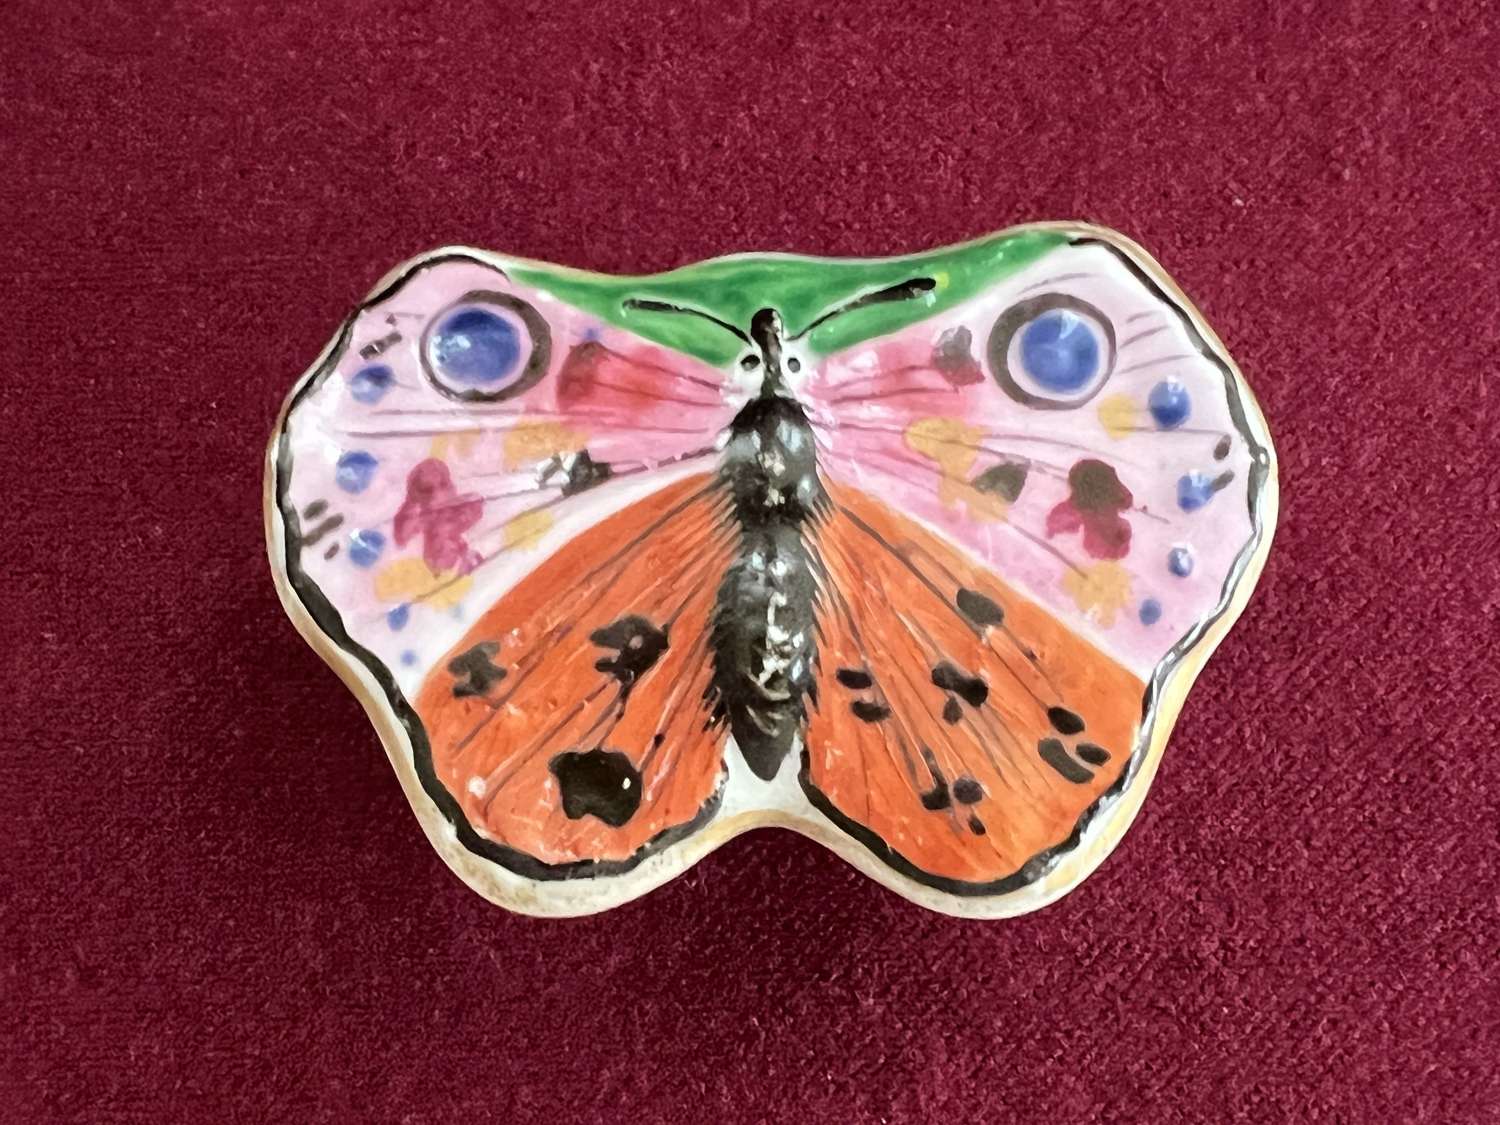 A rare English Porcelain Trinket Box in the form of a Butterfly c.1820